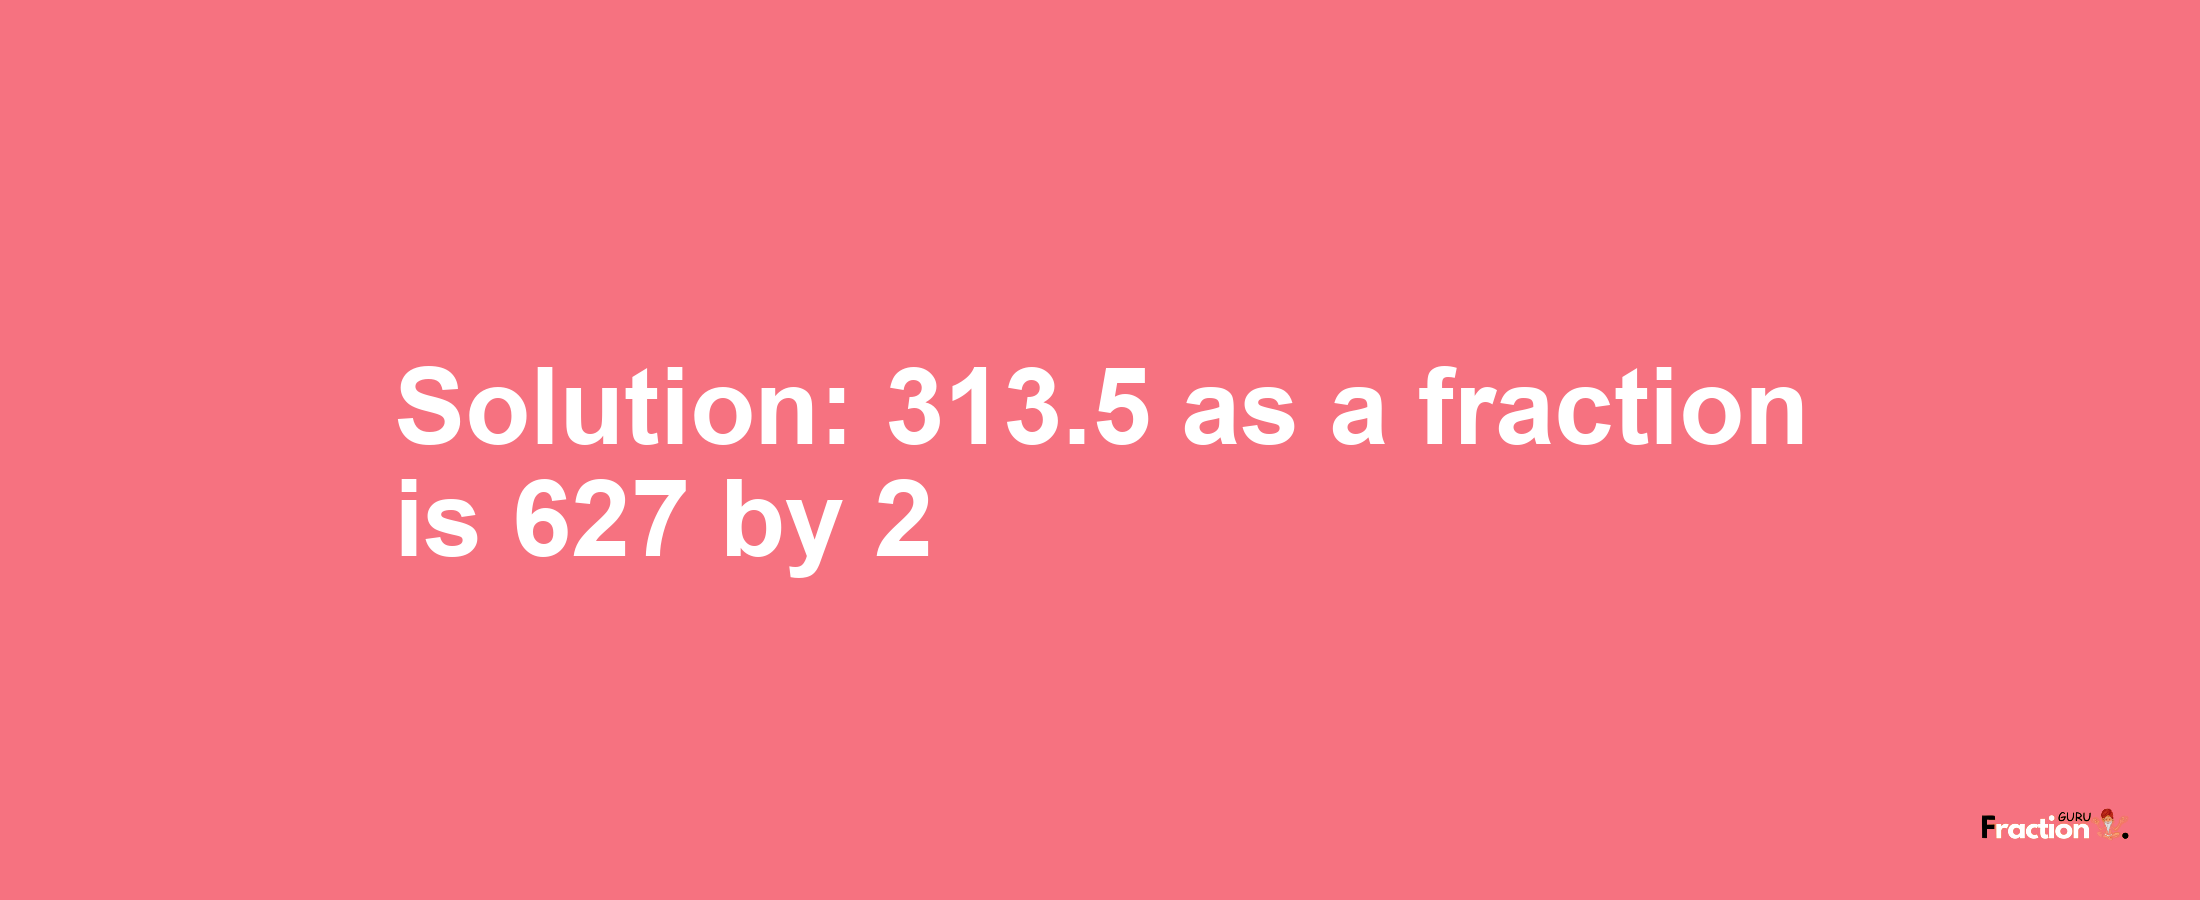 Solution:313.5 as a fraction is 627/2